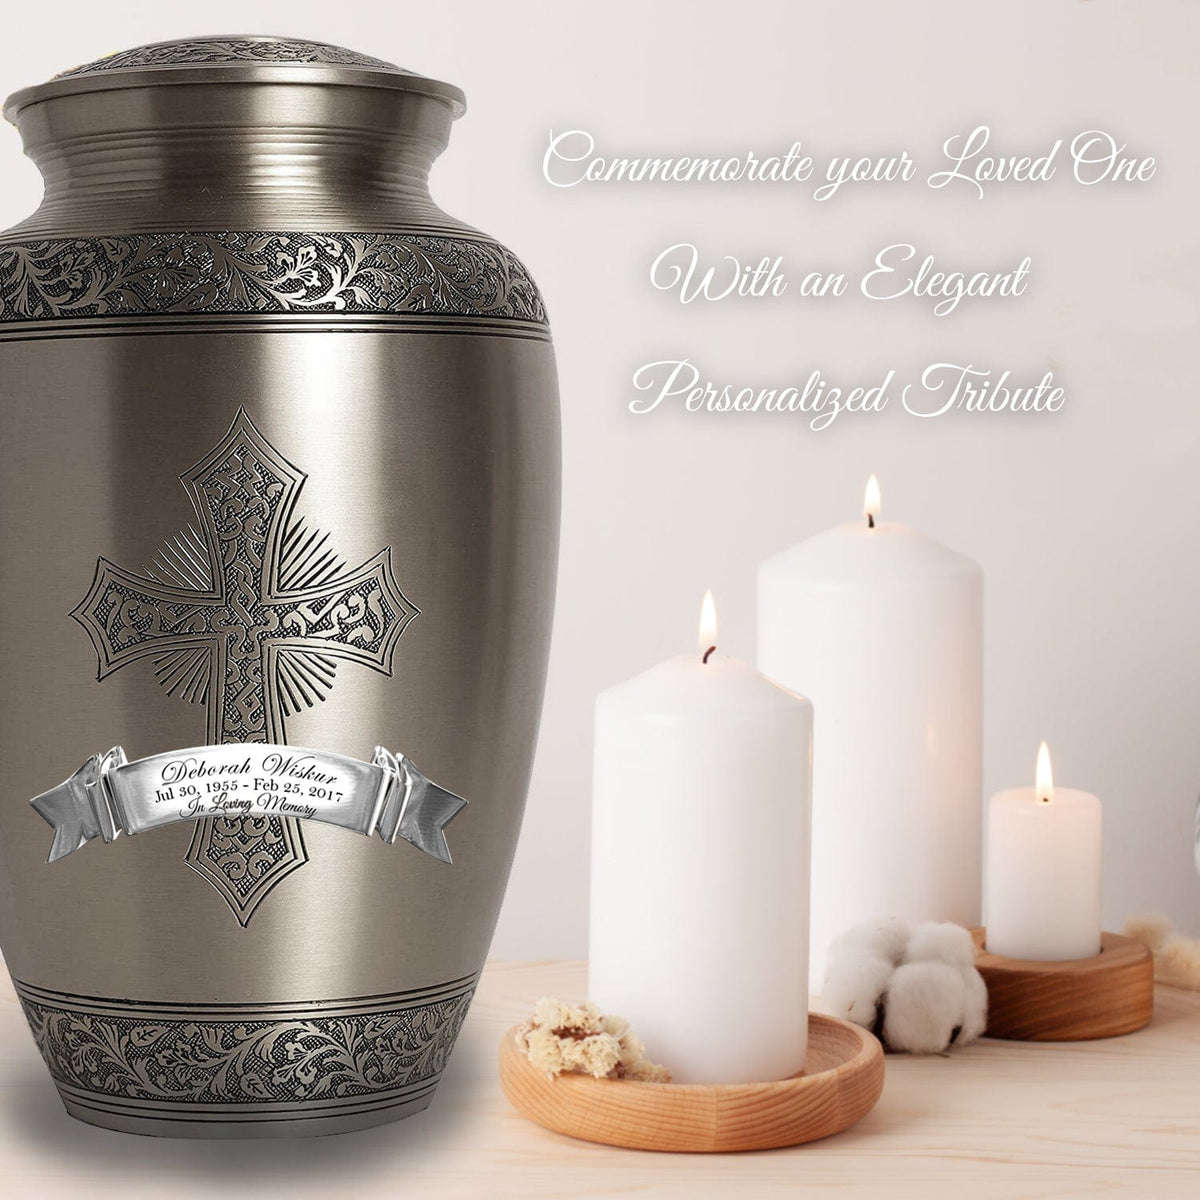 Commemorative Cremation Urns Love of Christ Silver Cross Cremation Urns